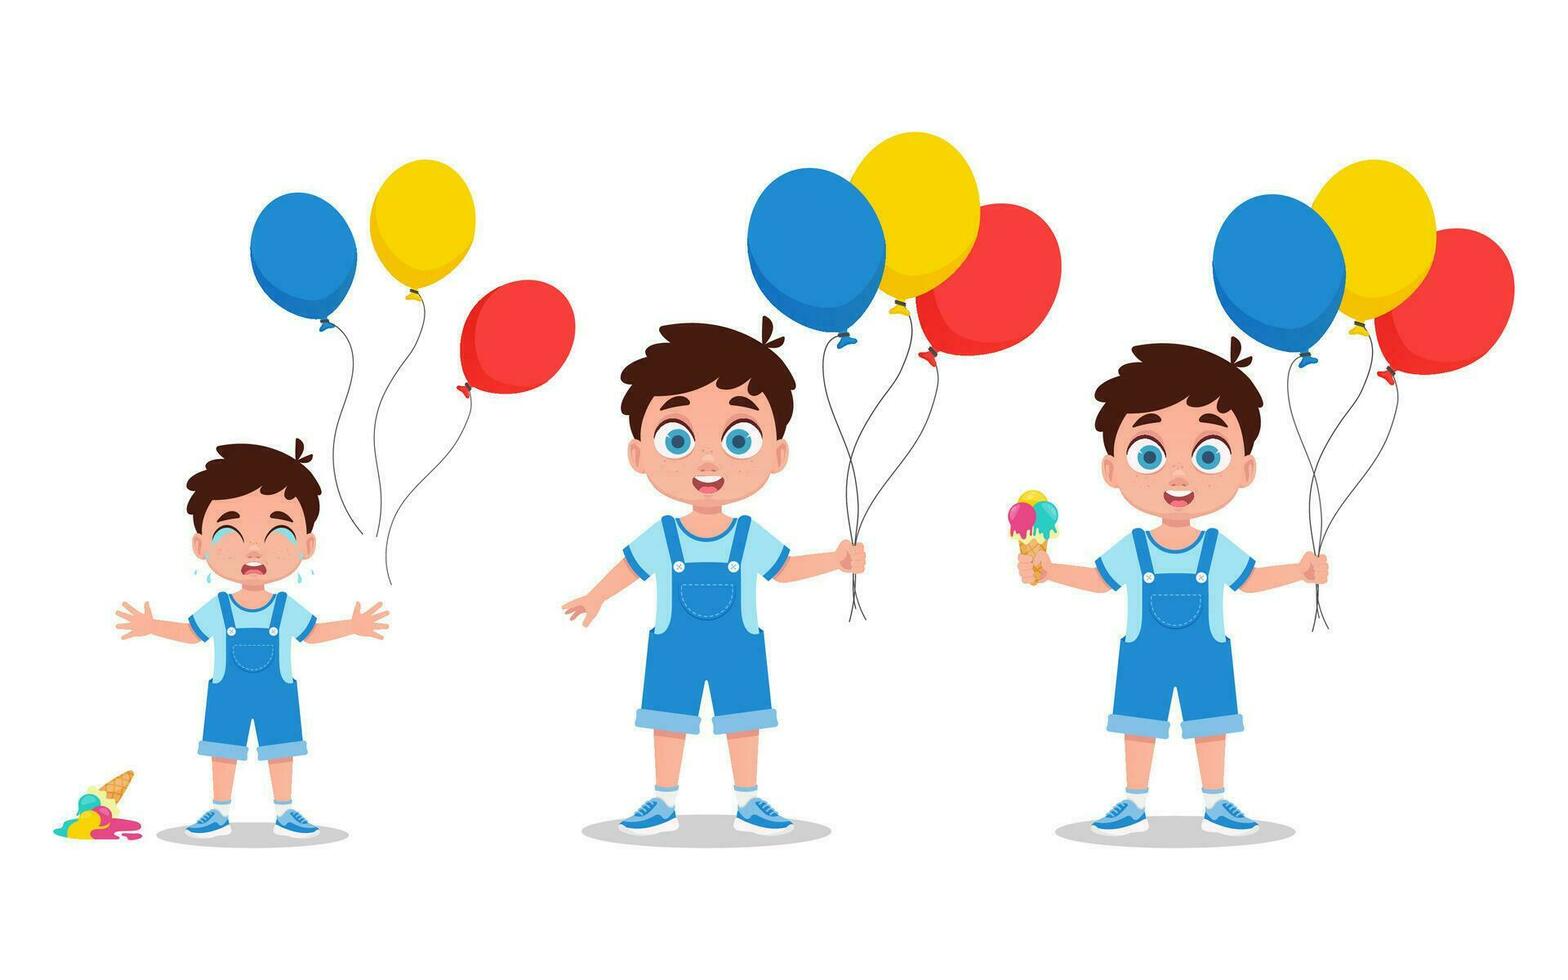 Set of illustrations of a boy with ice cream and balloons vector